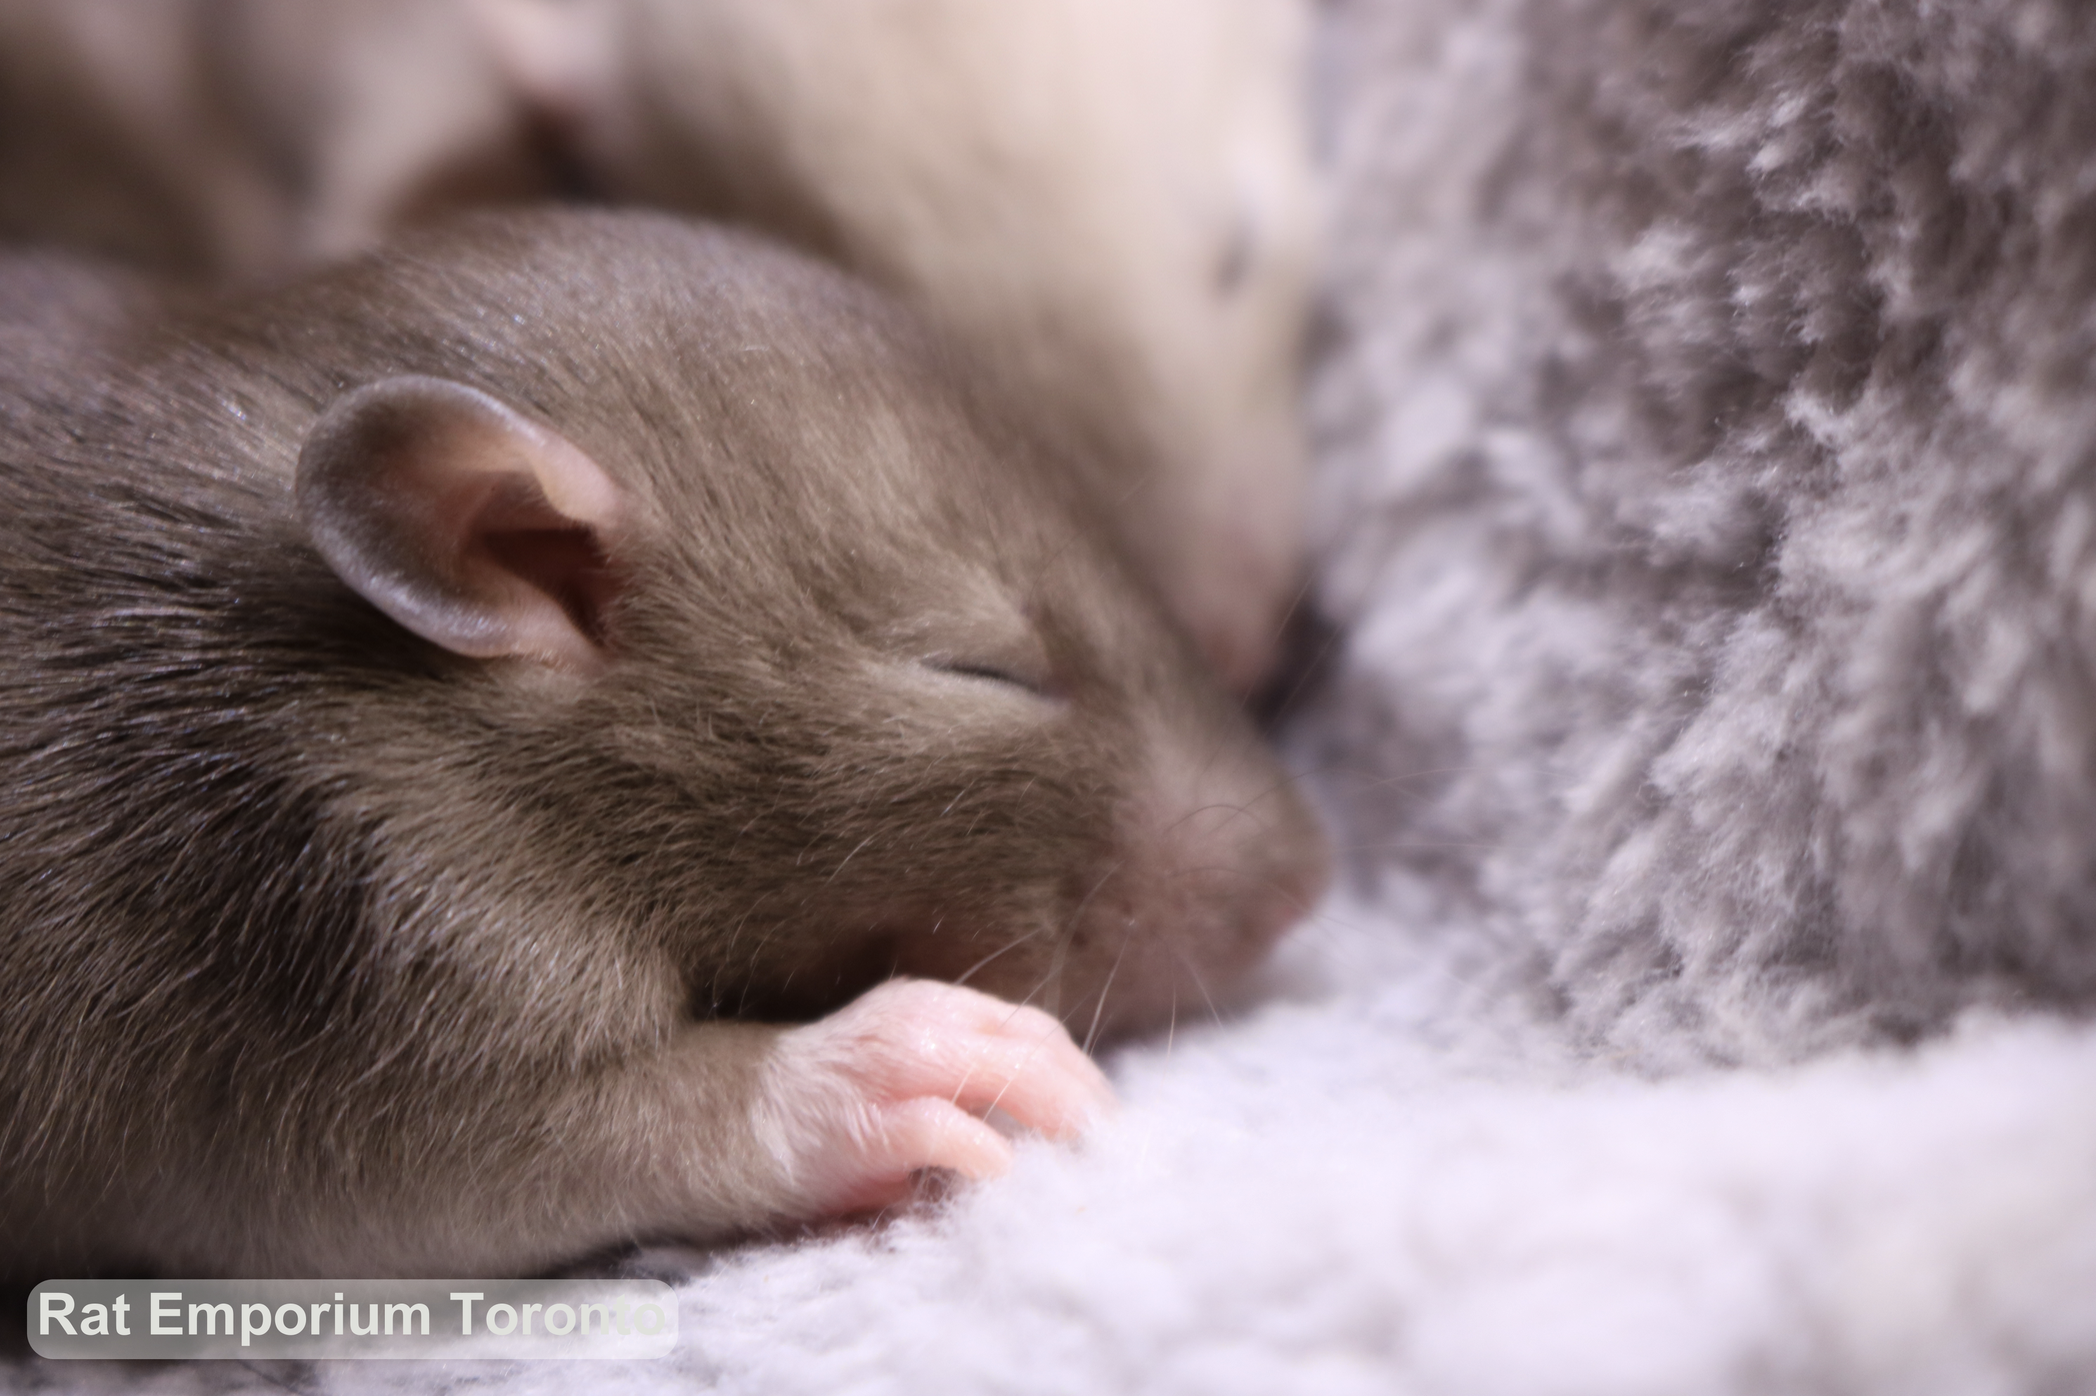 baby siamese and sable rats, dumbo and top ear bred at the Rat Emporium Toronto